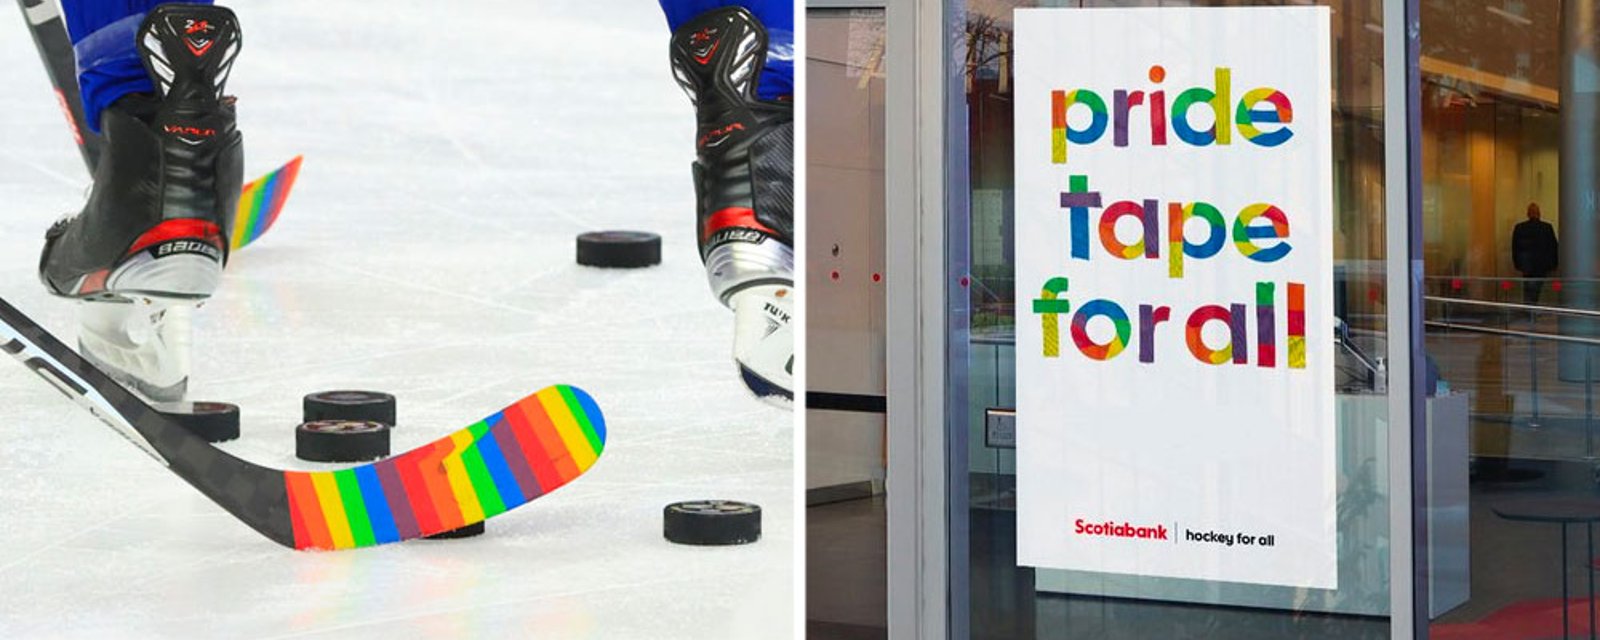 Scotiabank giving away 5,000 rolls of Pride tape across Canada